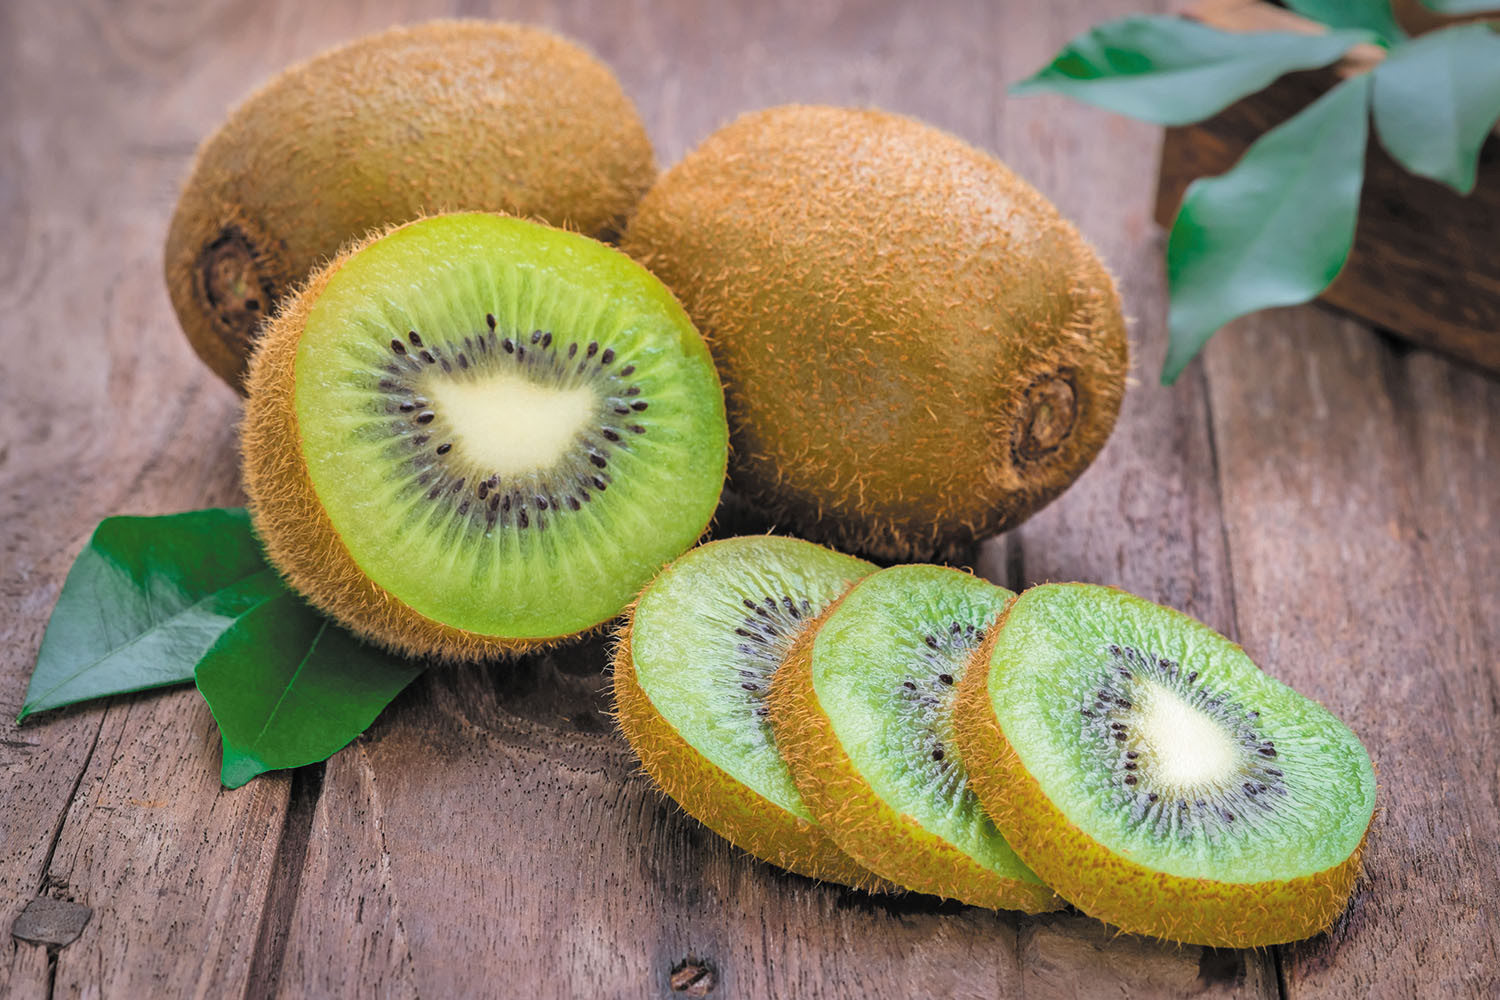 What are the medical advantages of Kiwi?